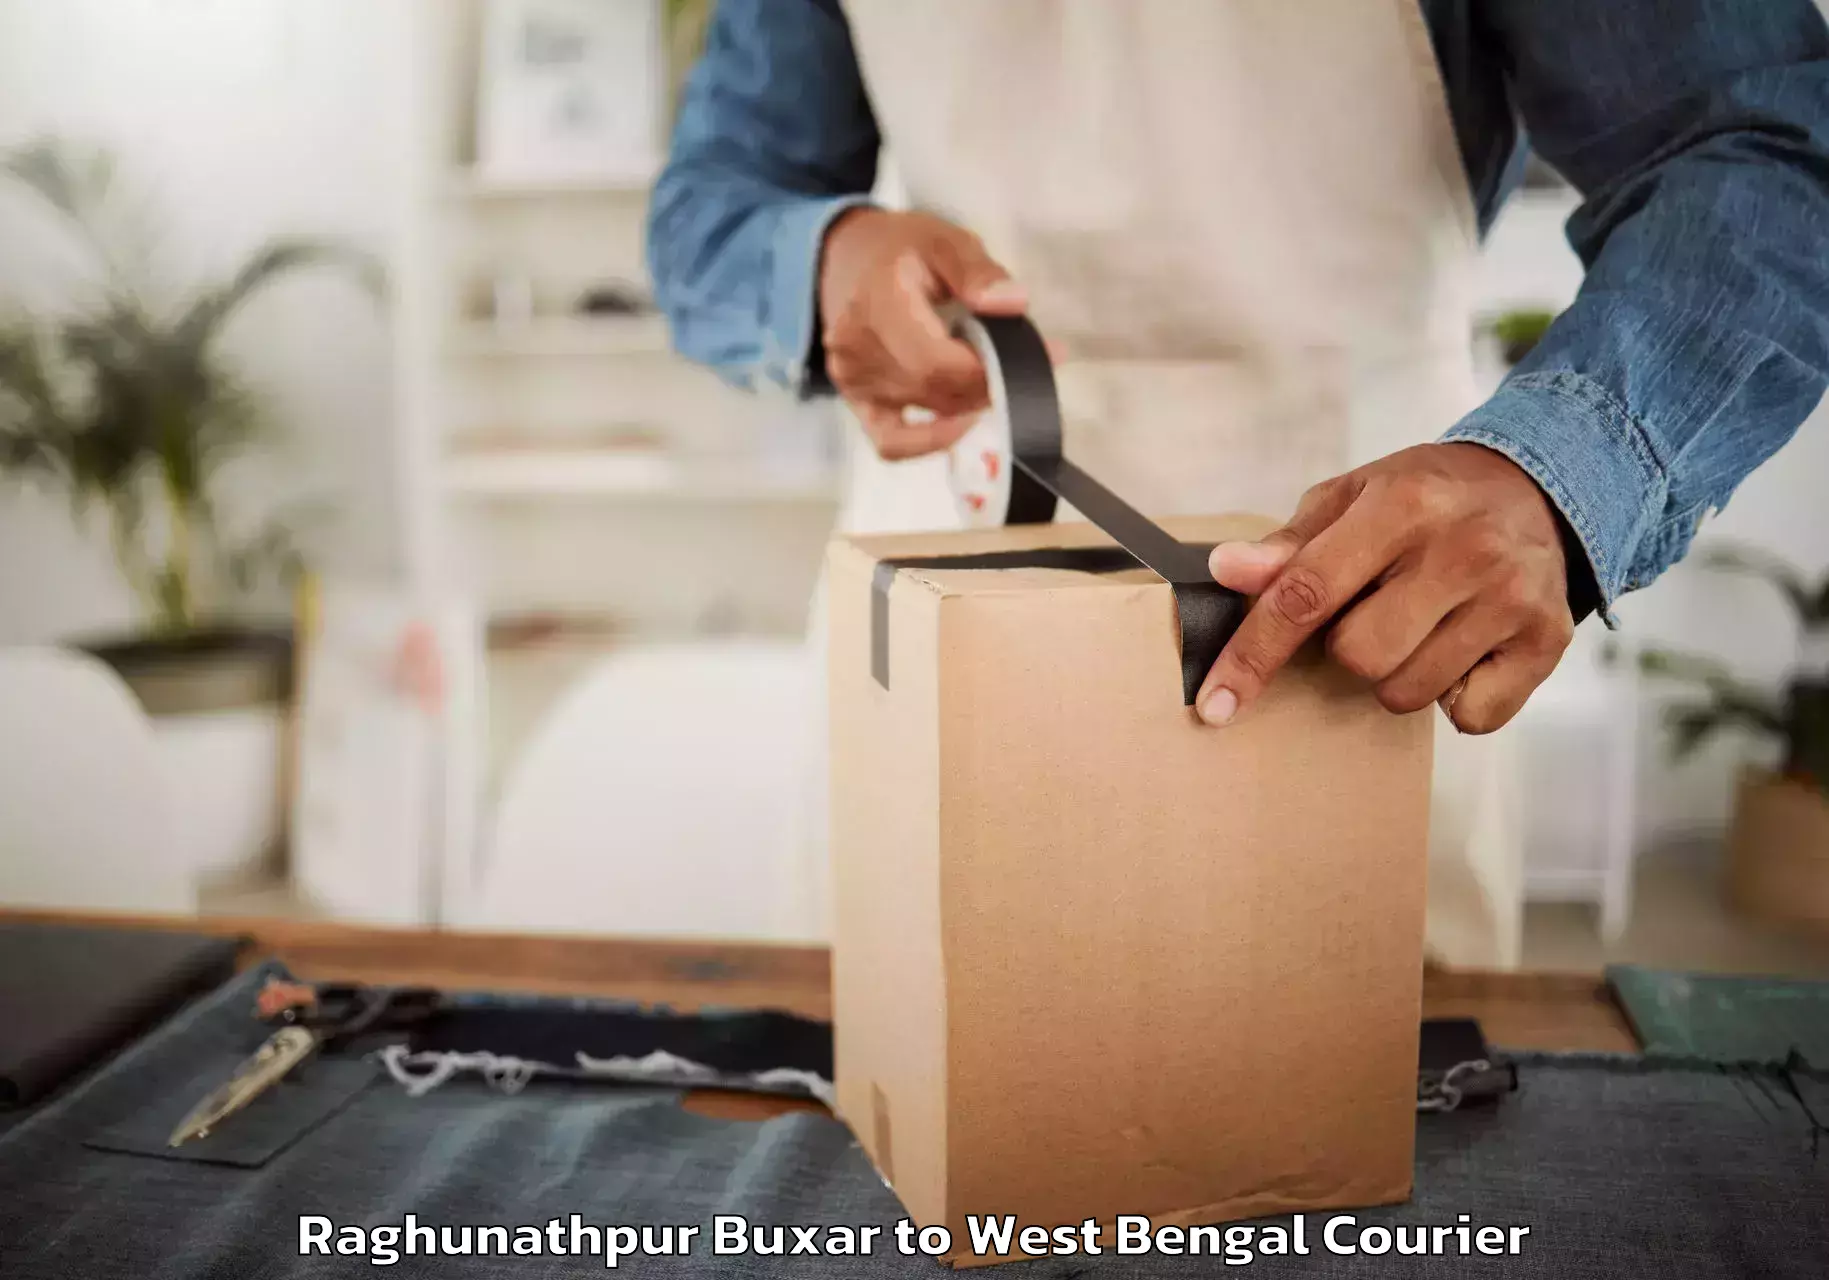 Home relocation experts Raghunathpur Buxar to West Bengal